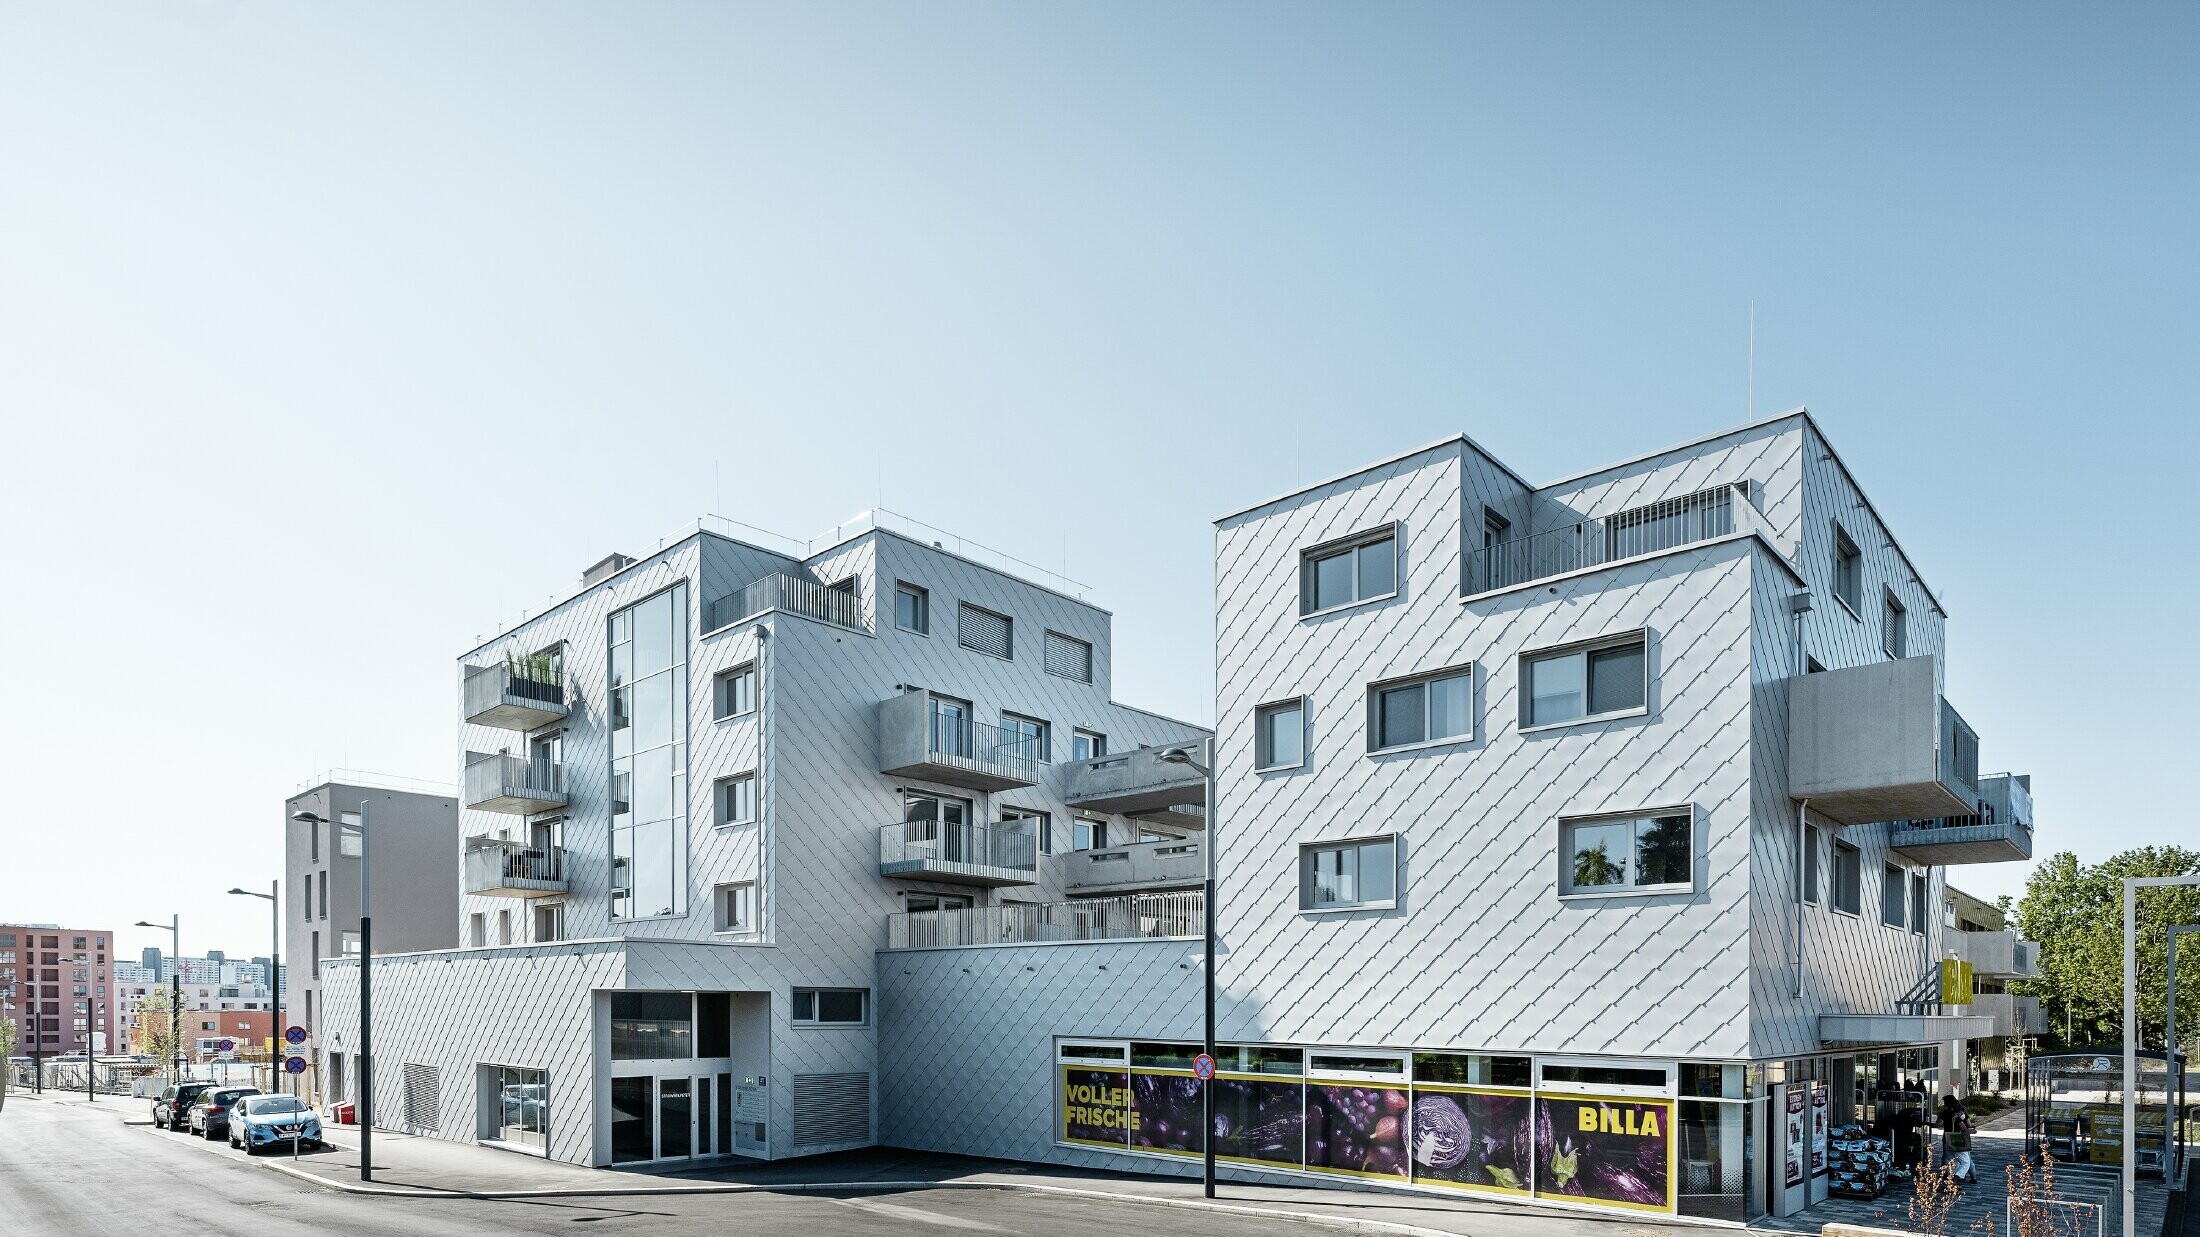 Apartment complexes with flat roof and rhomboid cladding on the façade with PREFA 44 × 44 rhomboid façade tiles in metallic silver